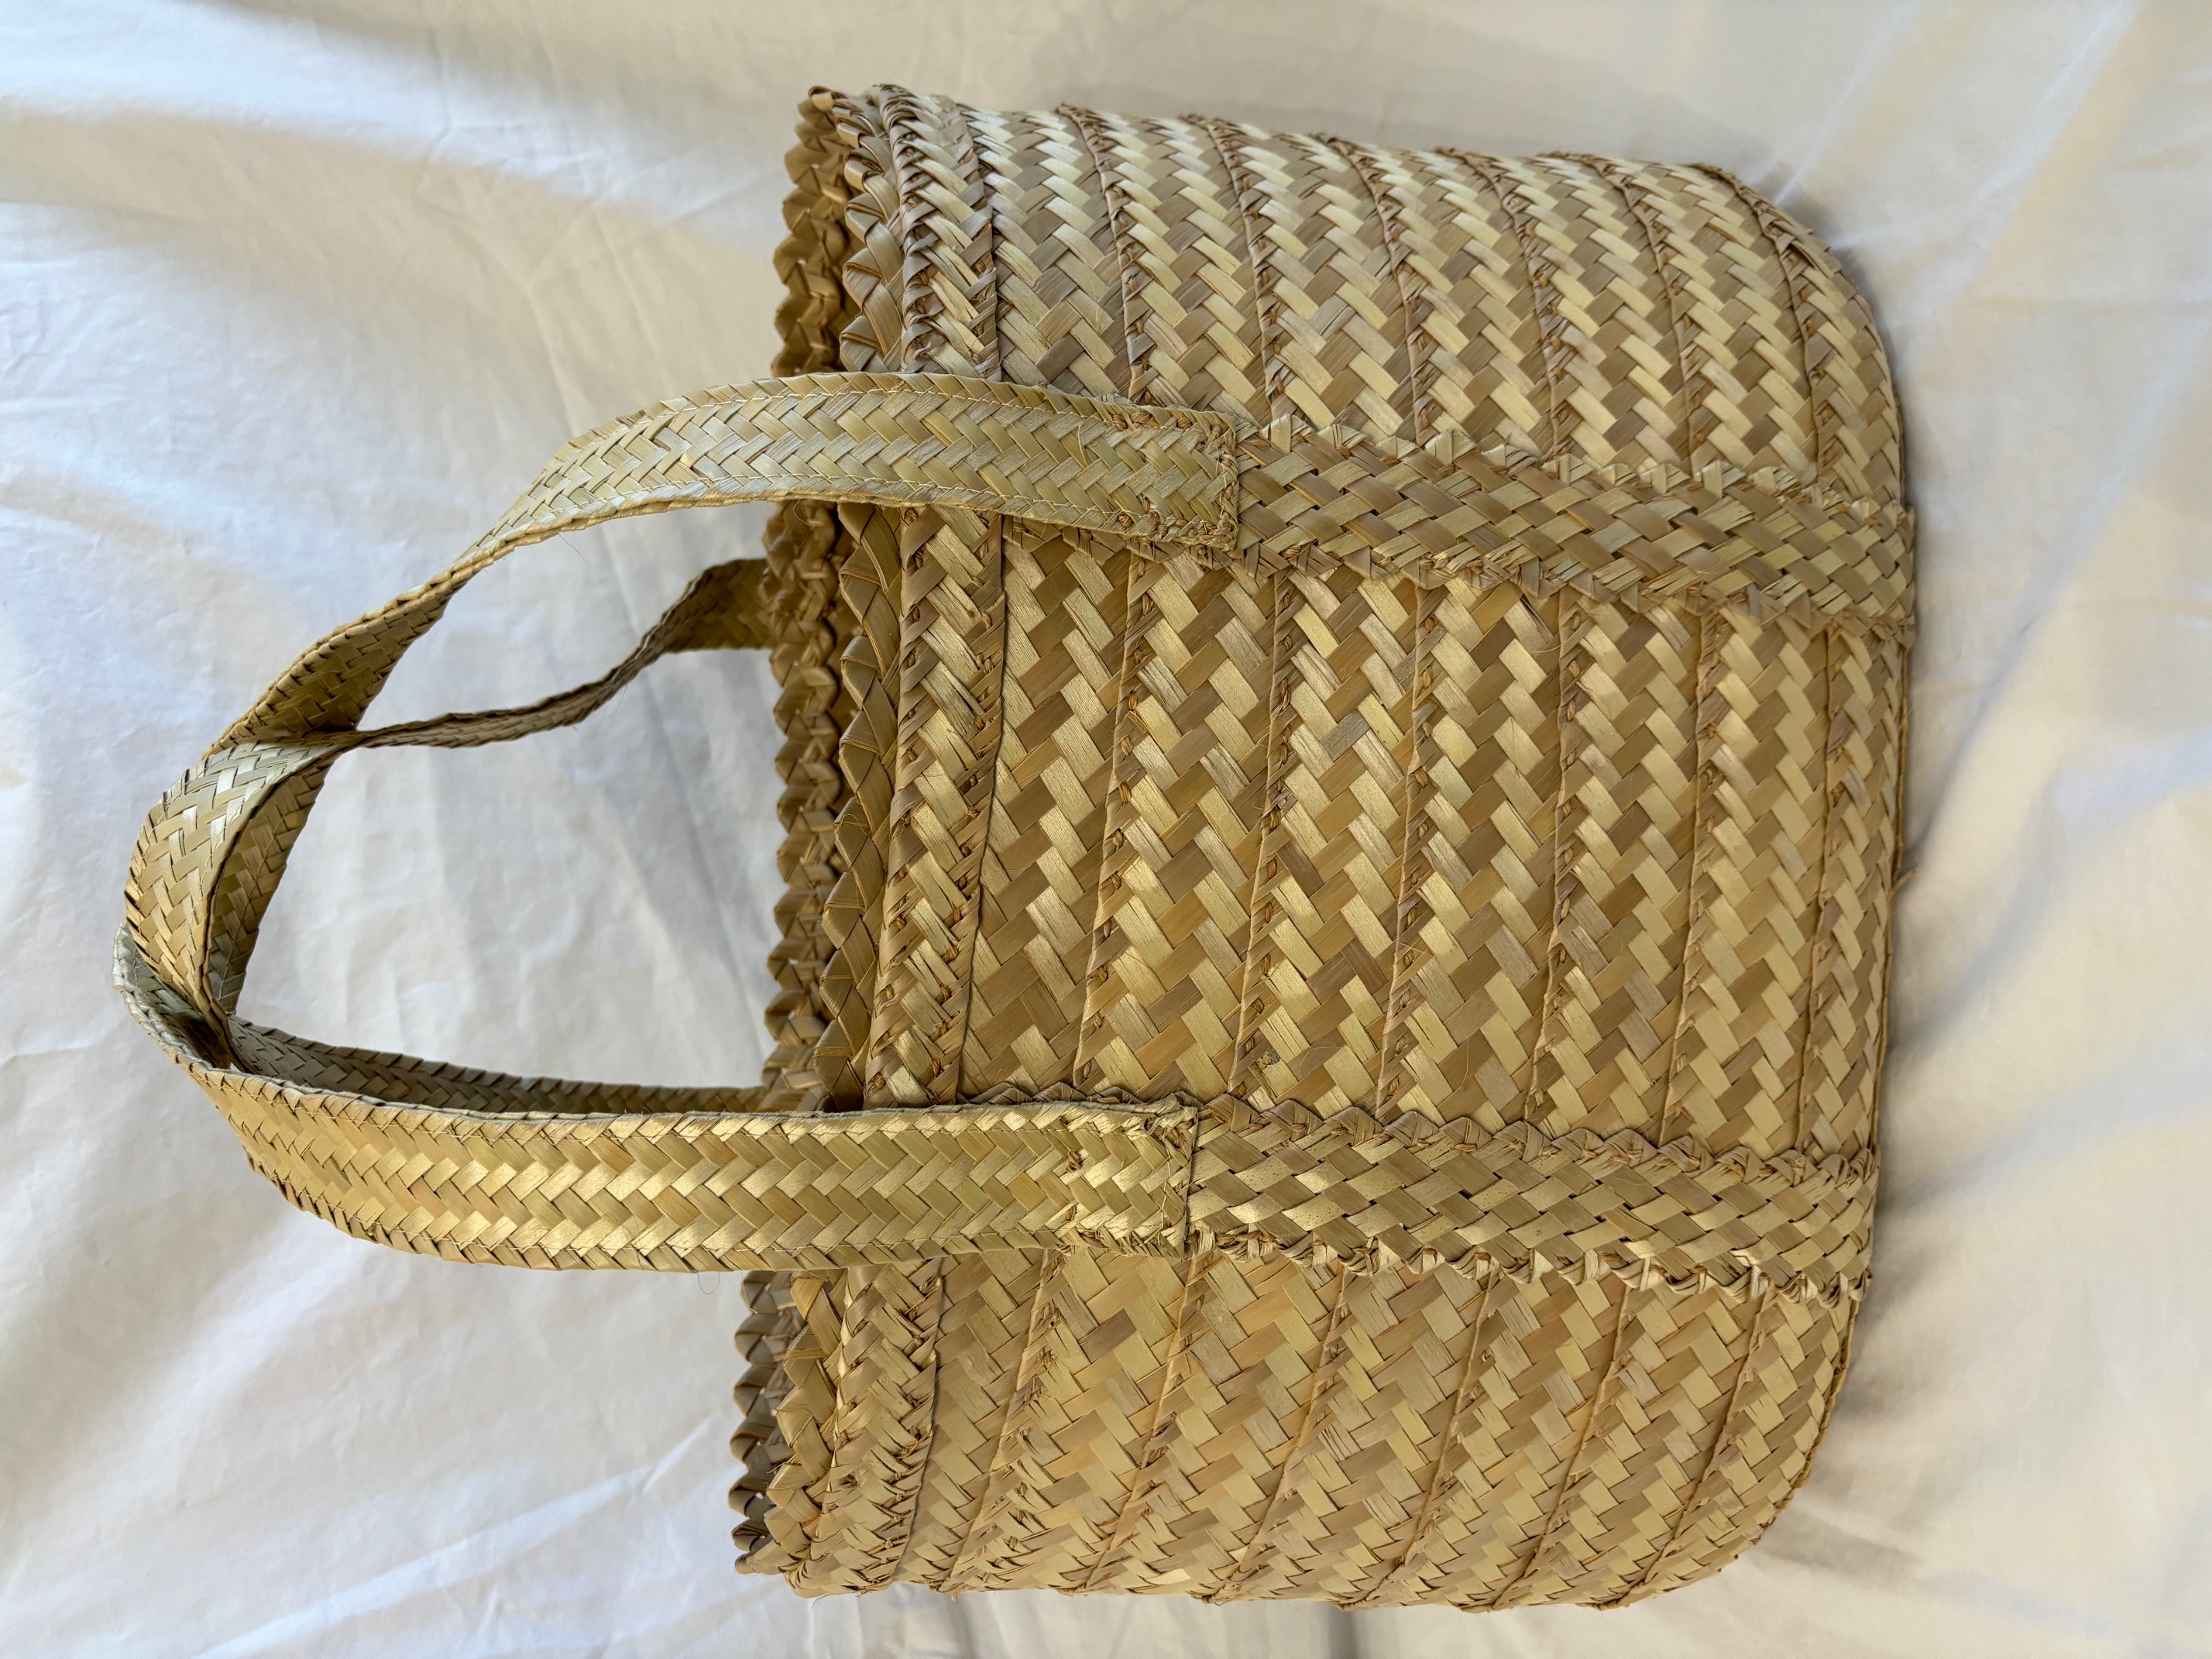 Handmade One-Of-a-Kind Thatched Basket #2